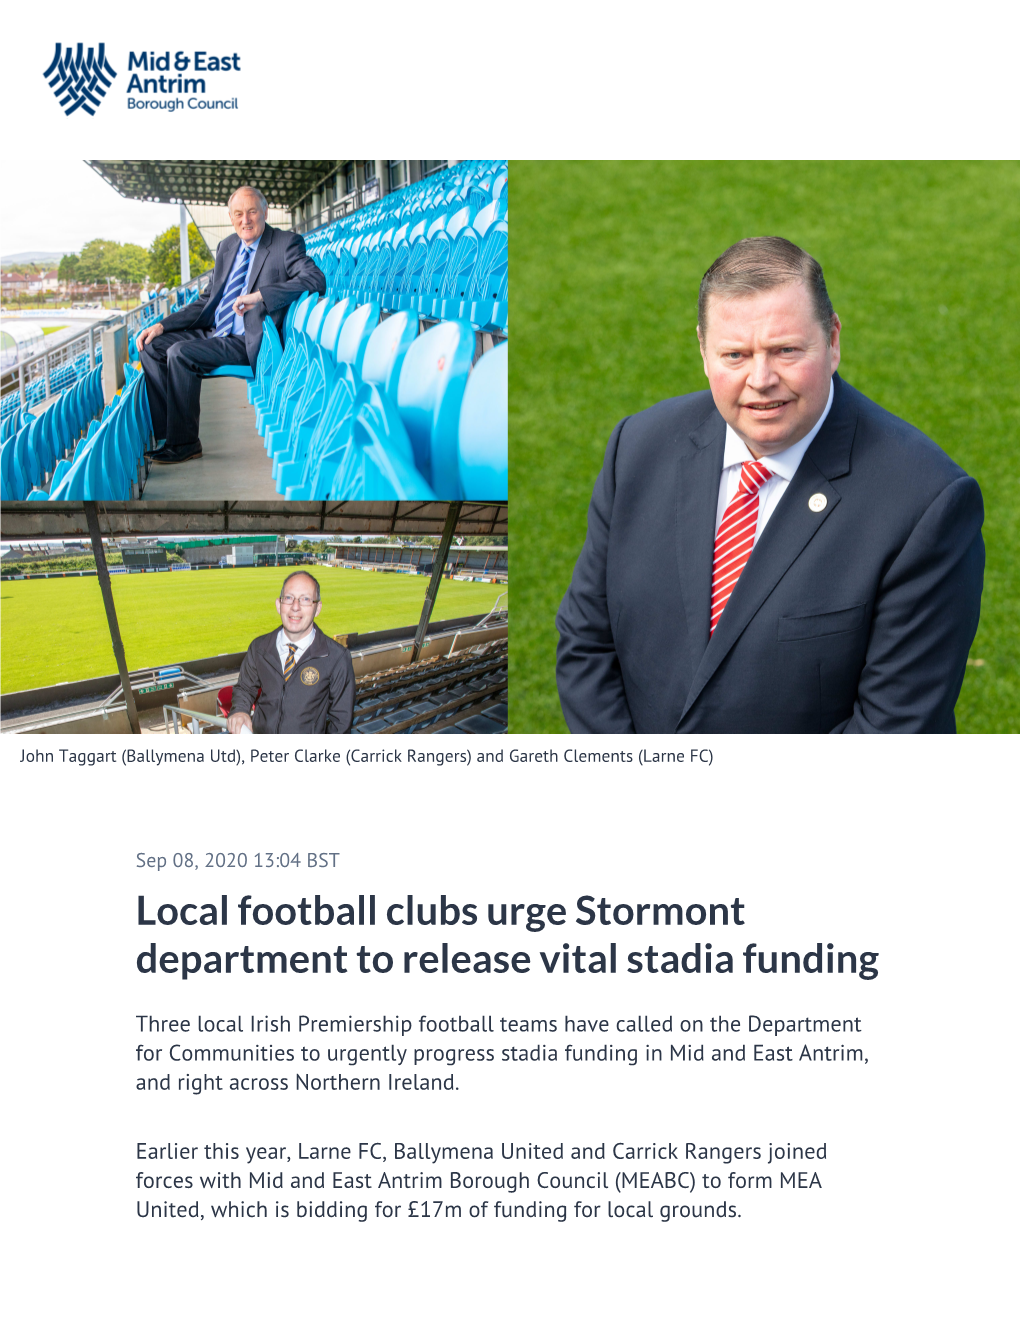 Local Football Clubs Urge Stormont Department to Release Vital Stadia Funding